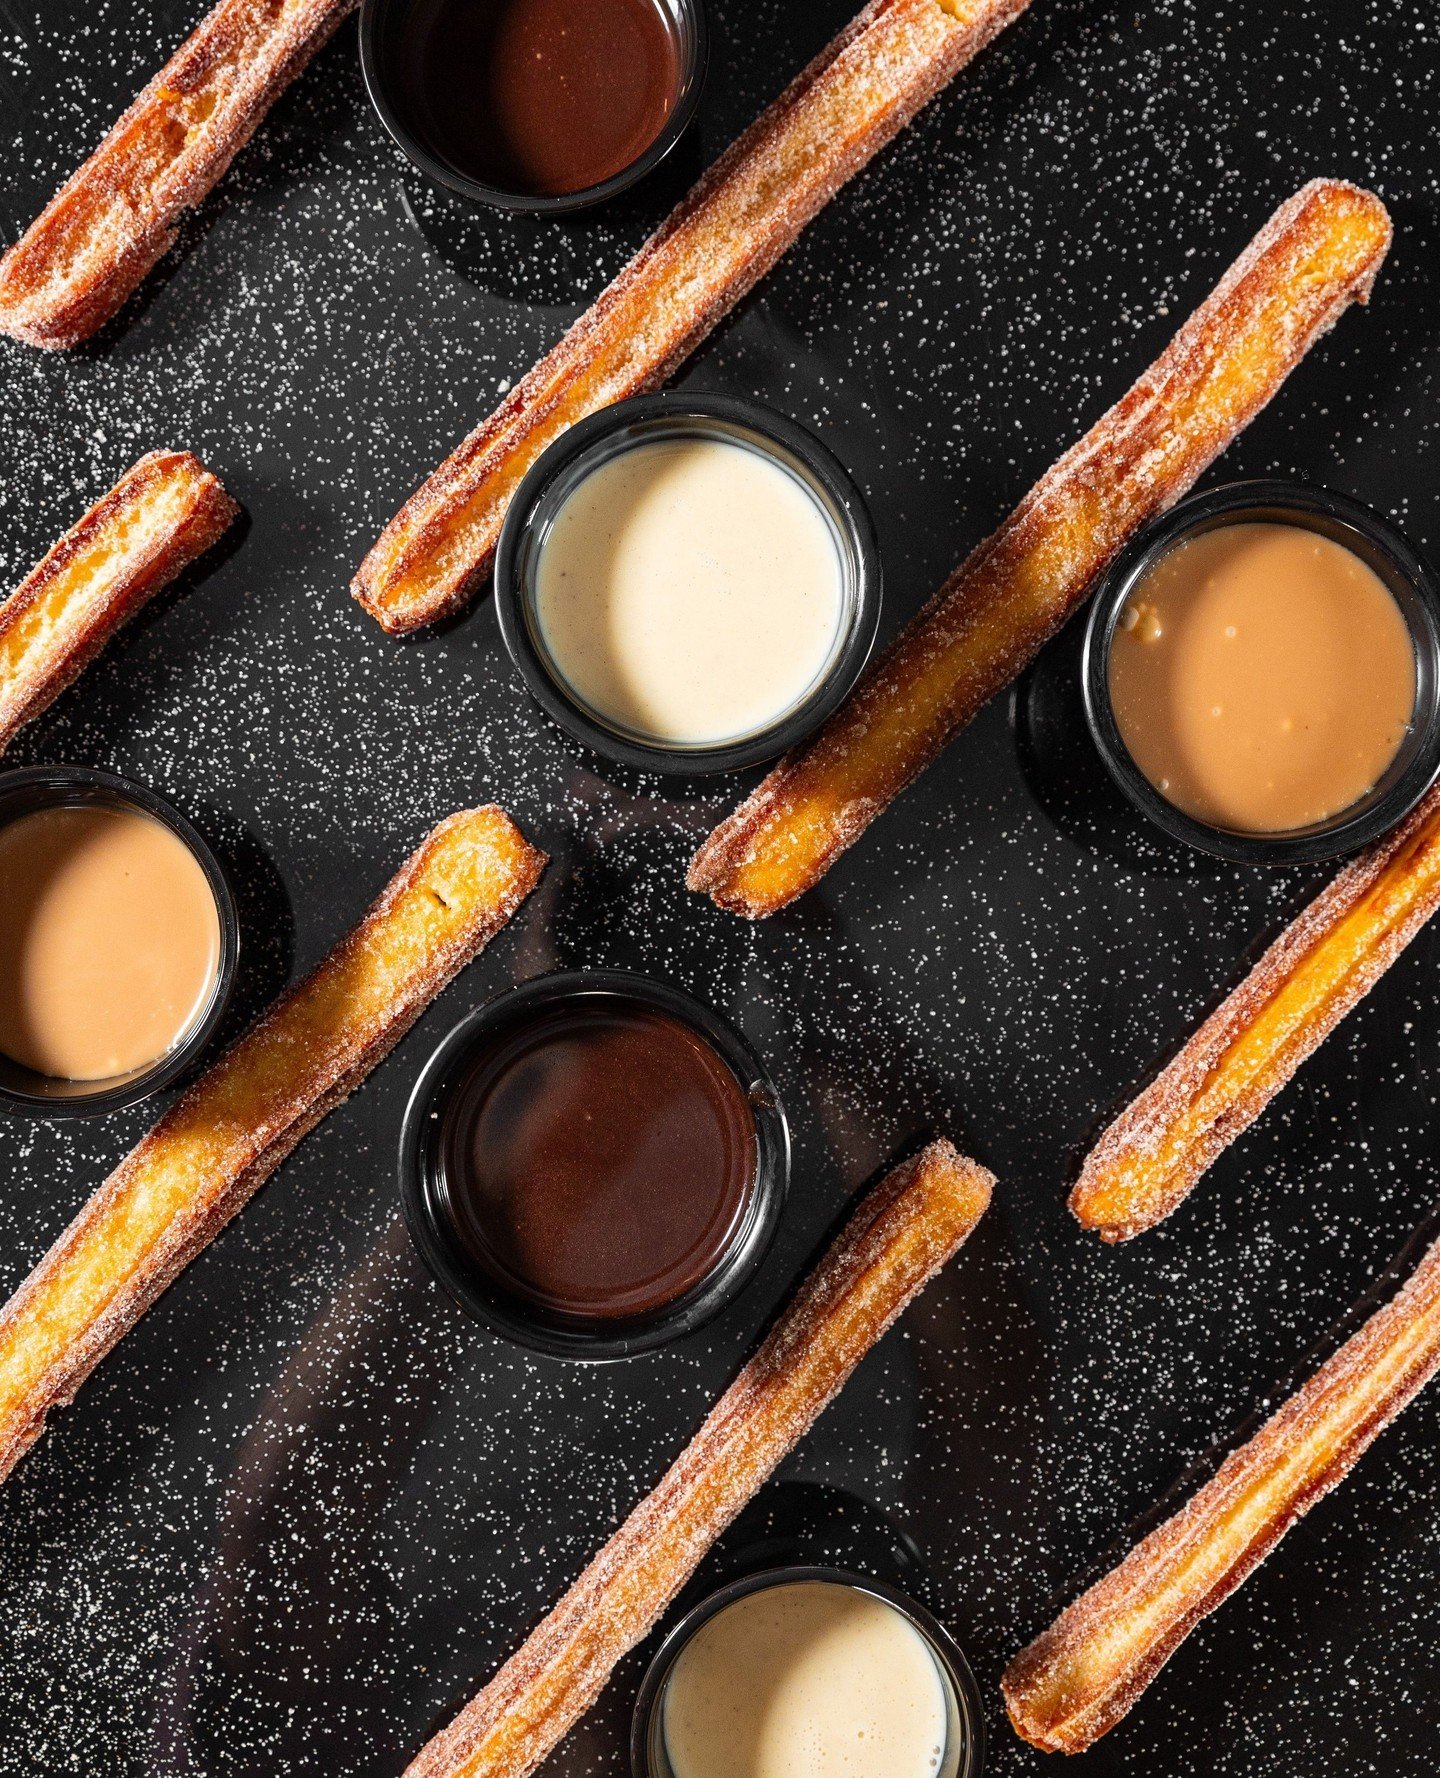 Scientifically proven fact:⁠
⁠
Churros make everything better... especially our homemade Churros with three different dipping sauces 🤤😮&zwj;💨⁠
⁠
Come in and make your Tuesday better by treating yo'self to these unforgettable treats 🔥⁠
.⁠
.⁠
.⁠
#t